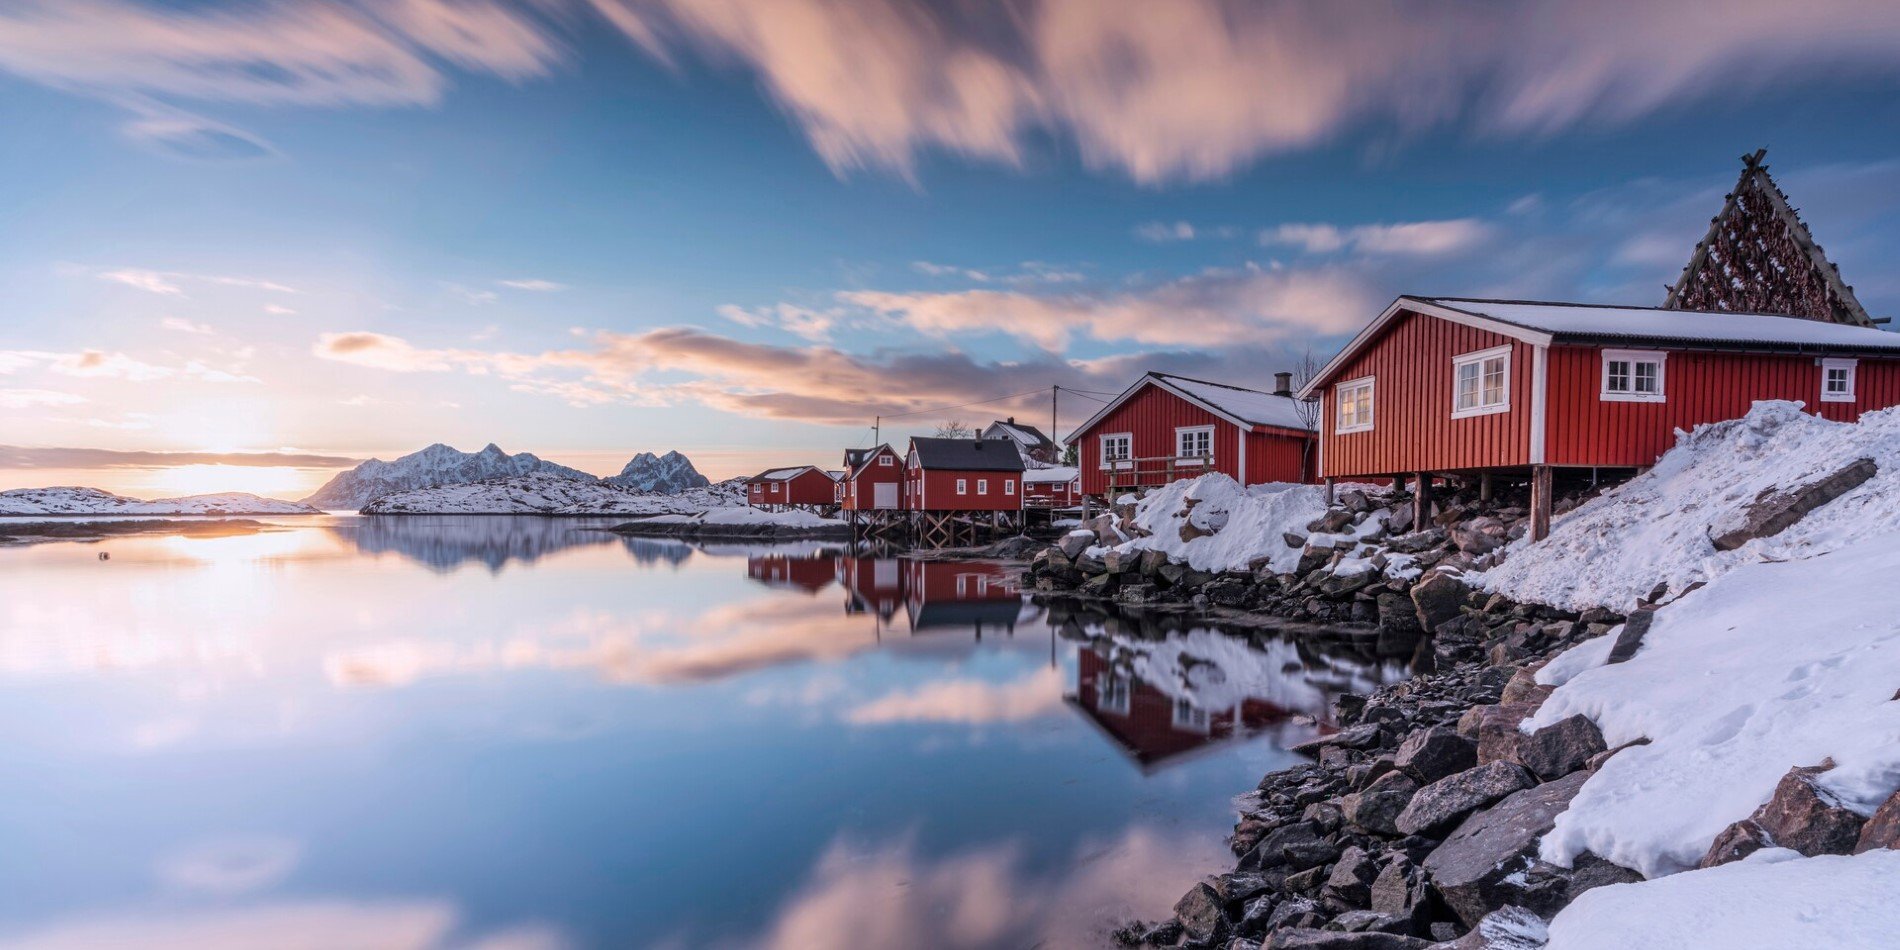 Reflections in the water at Svolvær in the Lofoten Islands